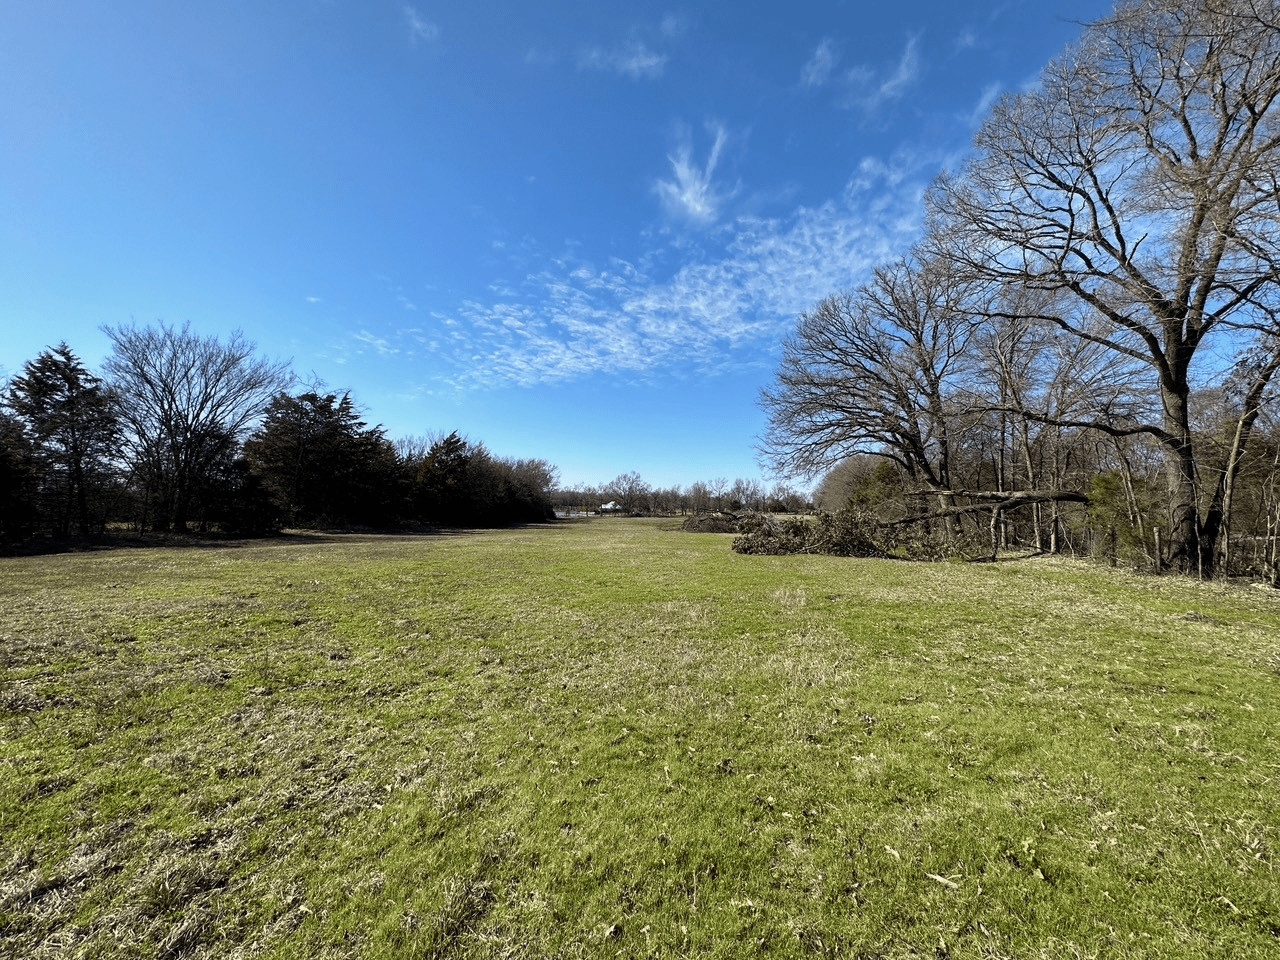 8 Unrestricted Land Tracts That Allows Manufactured or Tiny Home